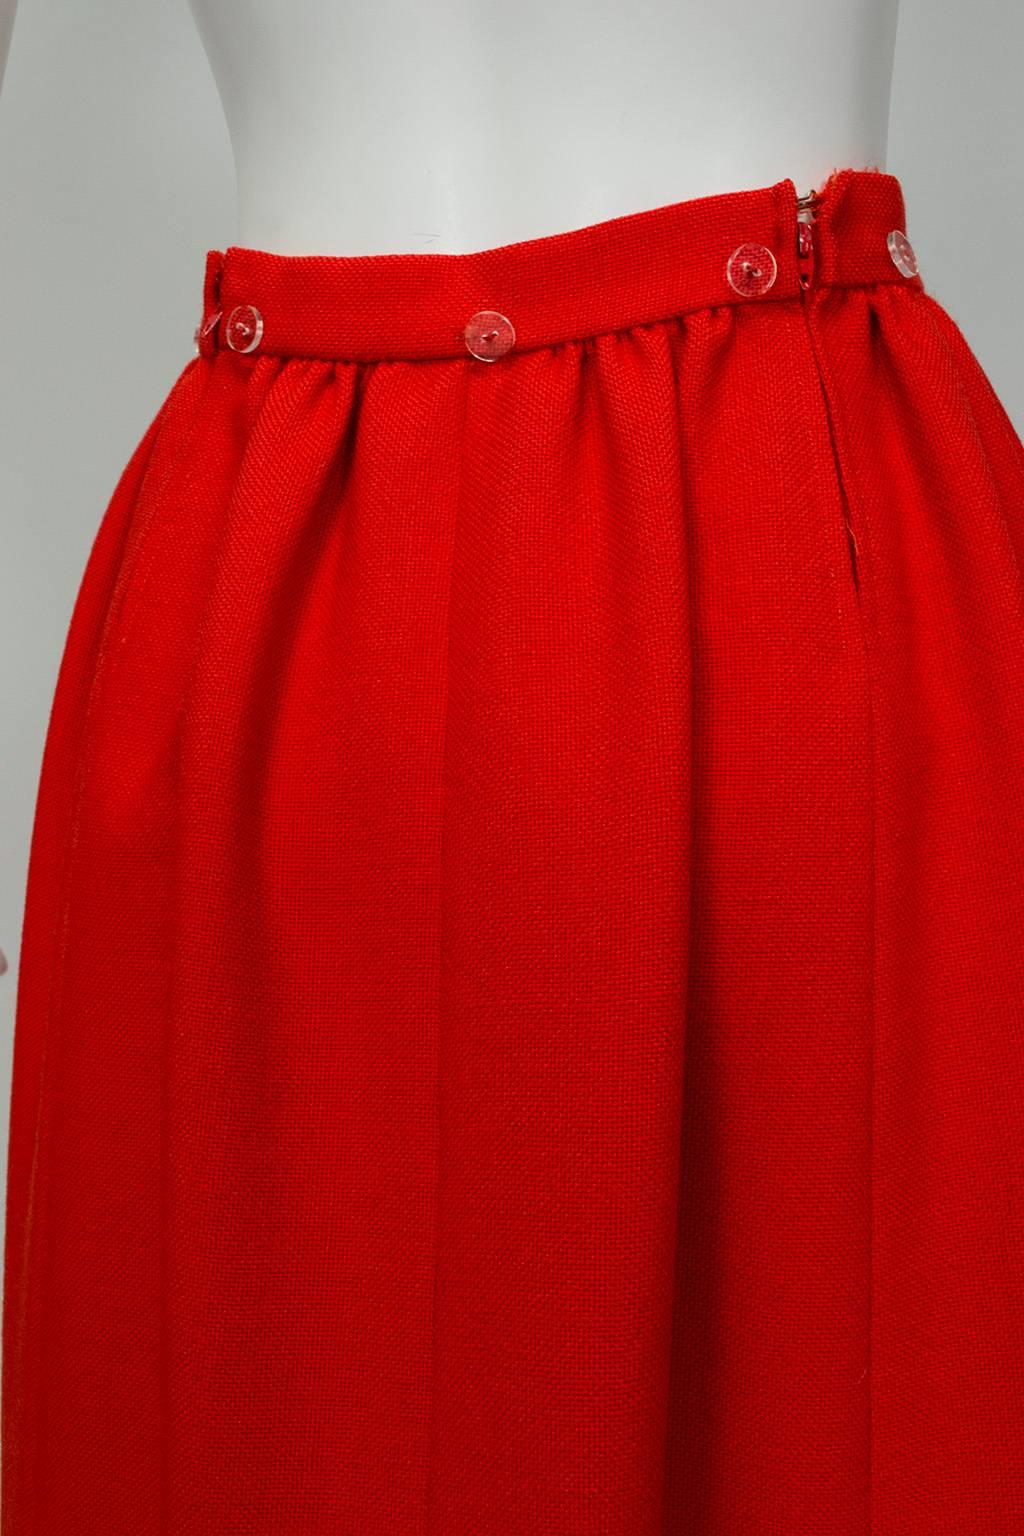 Norman Norell Heavyweight Red Gathered Hostess Skirt - Small, 1960s For Sale 2